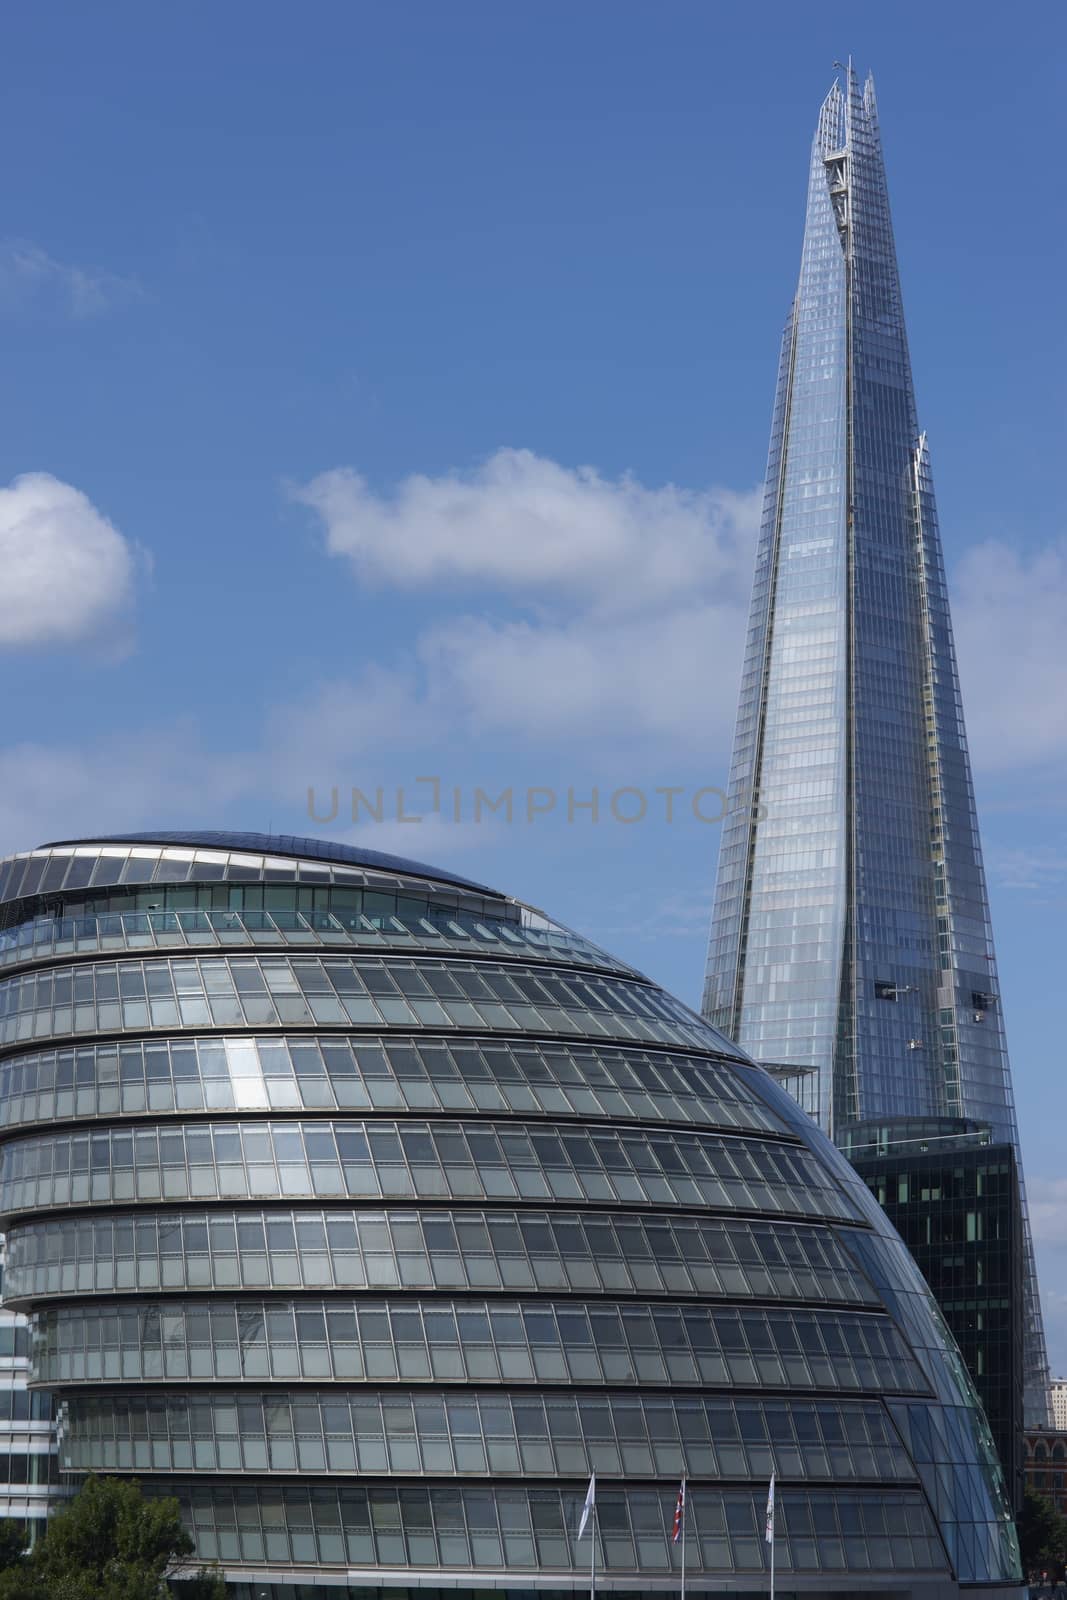 Iconic modern buildings on the south bank of the River Thames in London, United Kingdom. The shard tower over the offices of the Mayor of London.